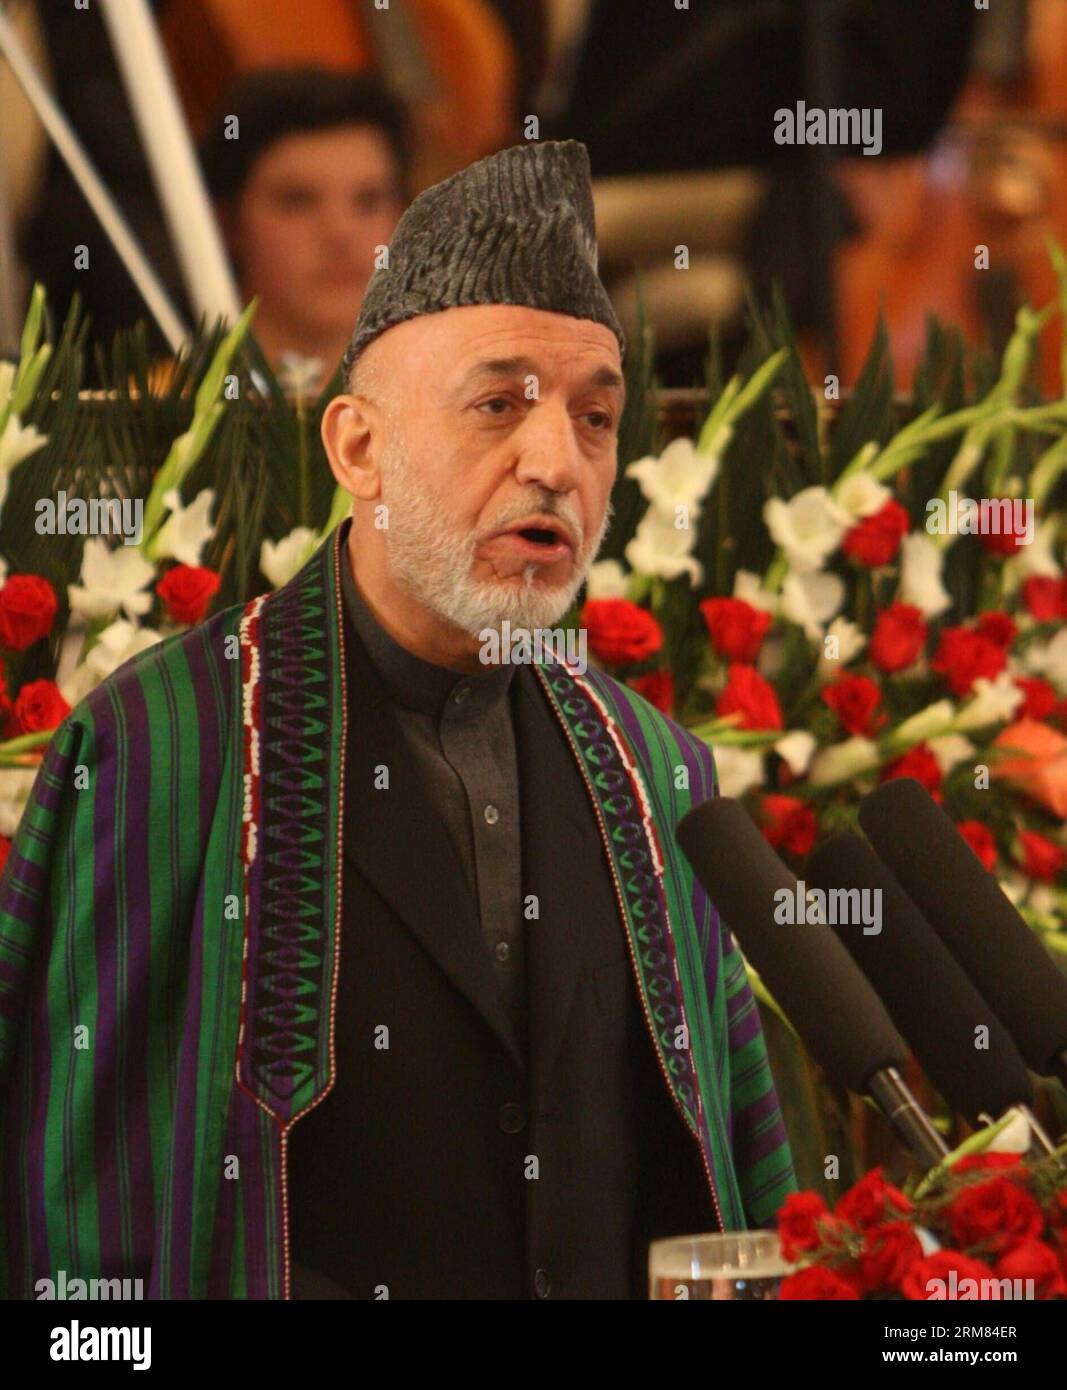 140327) -- KABUL, March 27, 2014 (Xinhua) -- Afghanistani president Hamid  Karzai addresses the New Year celebration at the presidential palace in  Kabul, Afghanistan, March 27, 2014. Visiting Iran s president Hassan